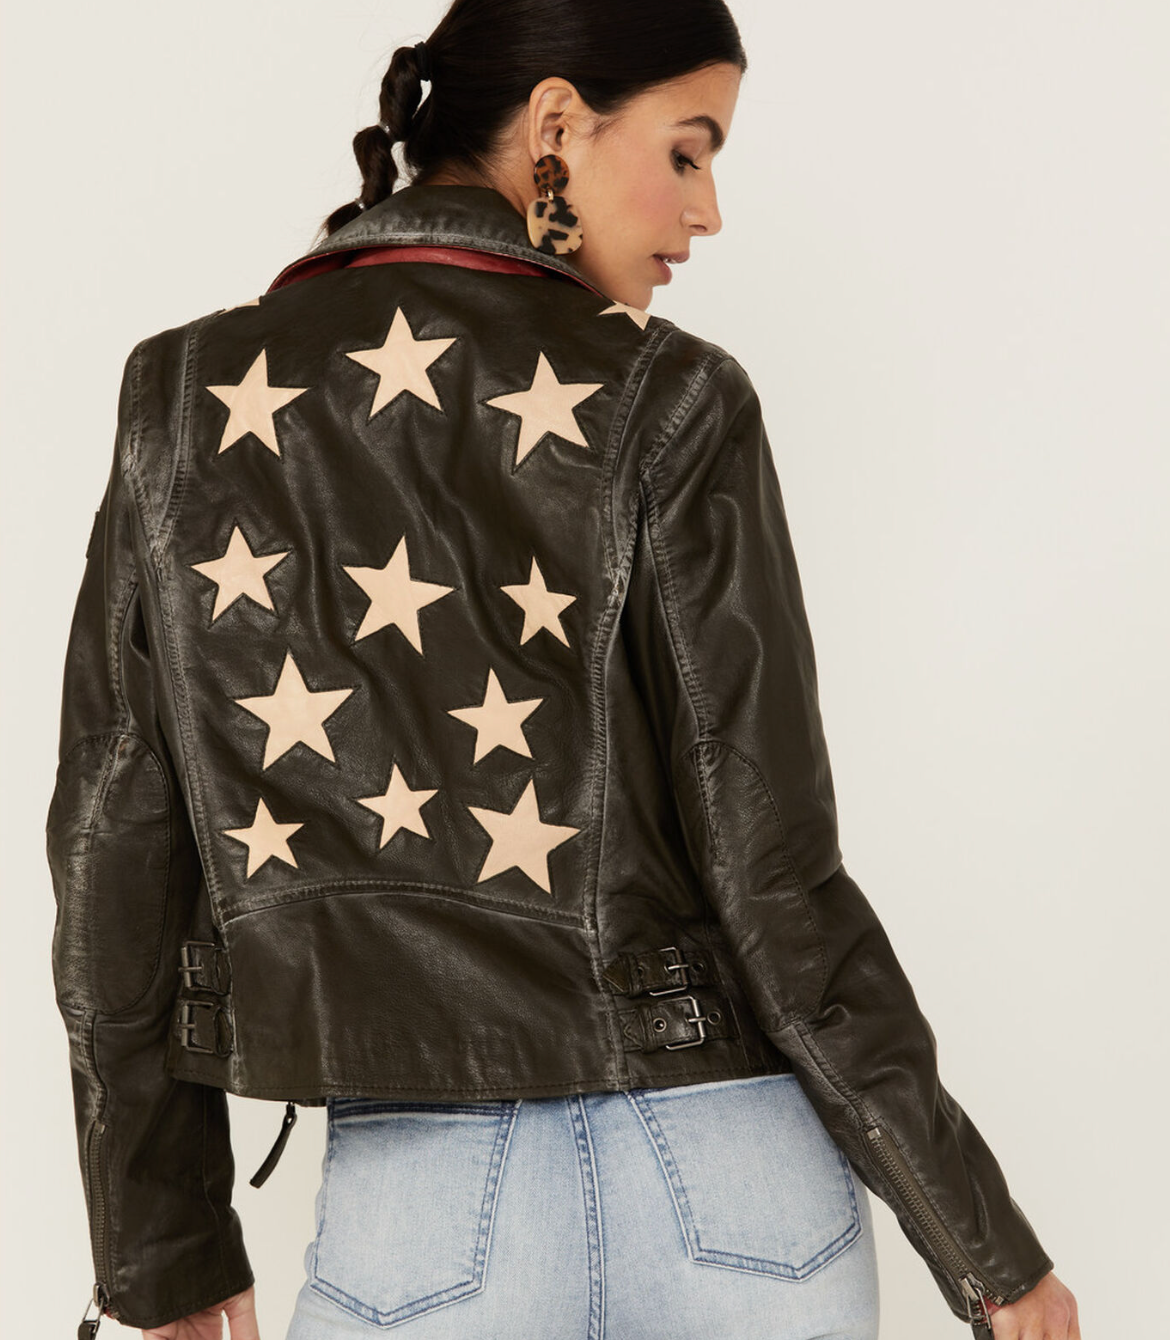 Mauritius Women's Starry Leather Jacket